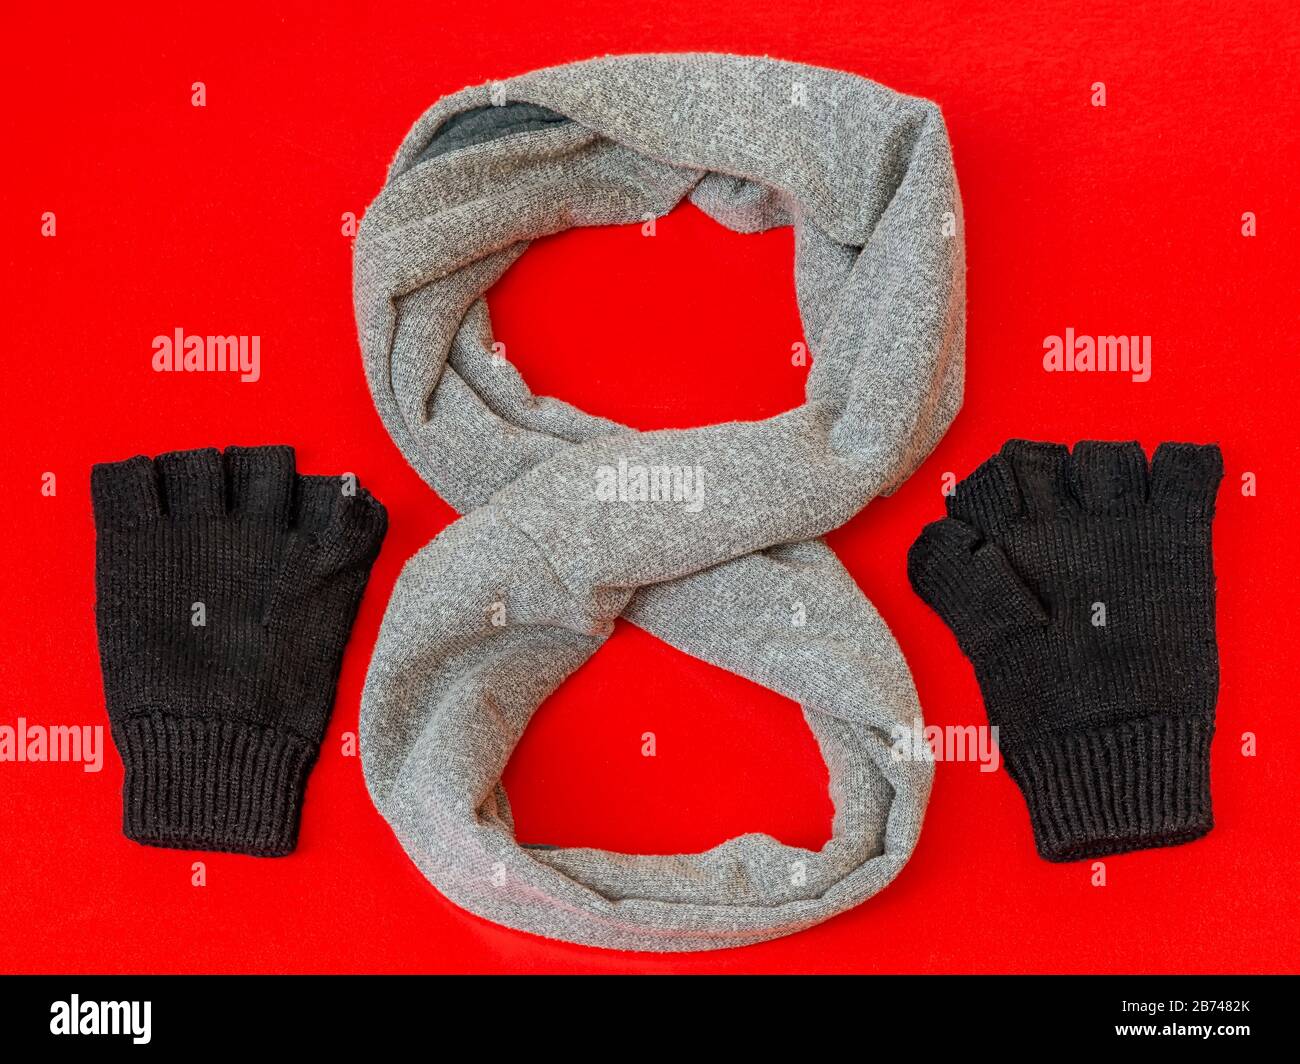 Composition of gray scarf and black gloves, both of wool, on a bright red background. Stock Photo